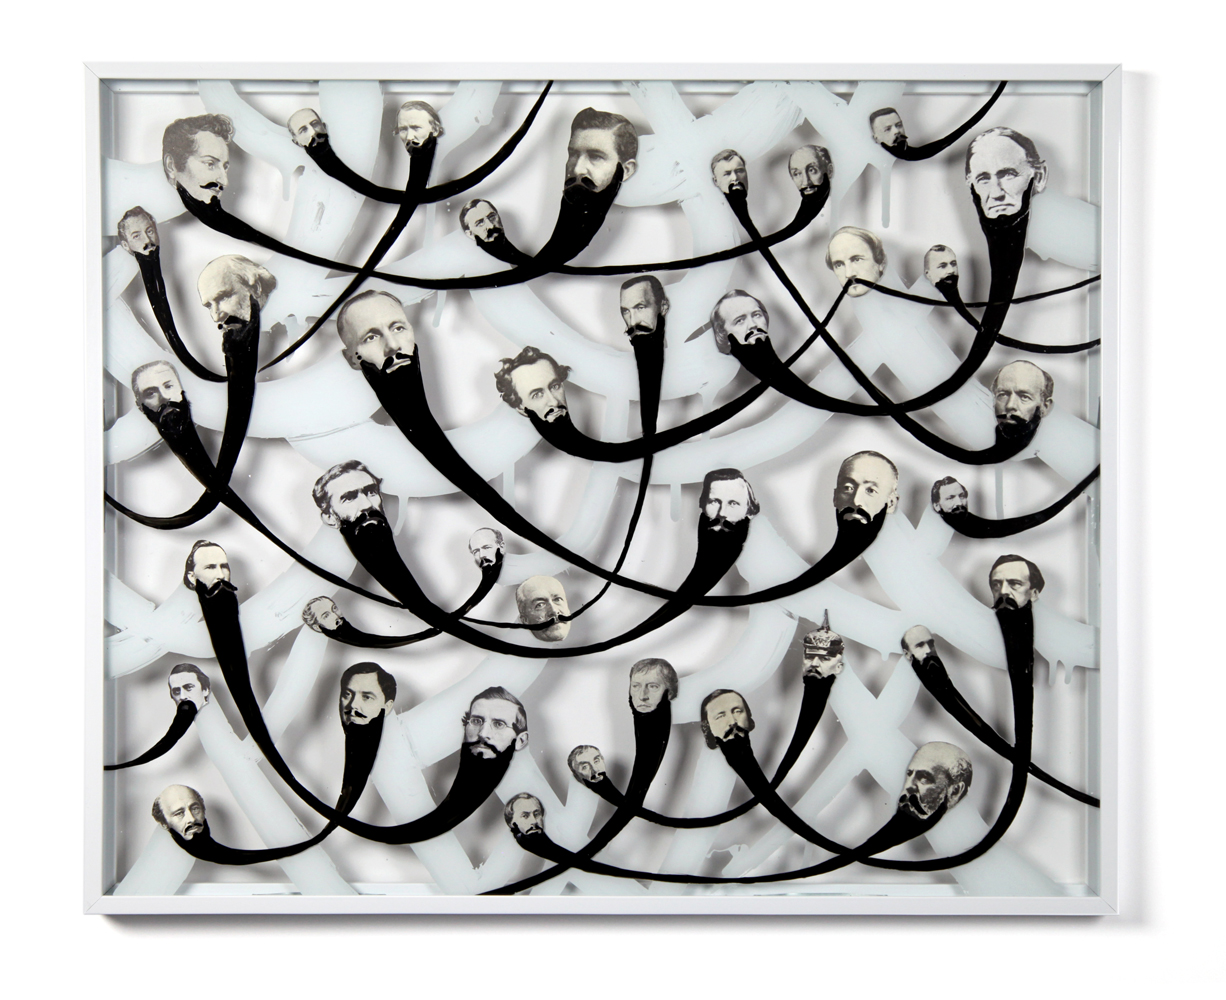   Barbarians 2 , 2013, enamel, silver nitrate and collage on glass 